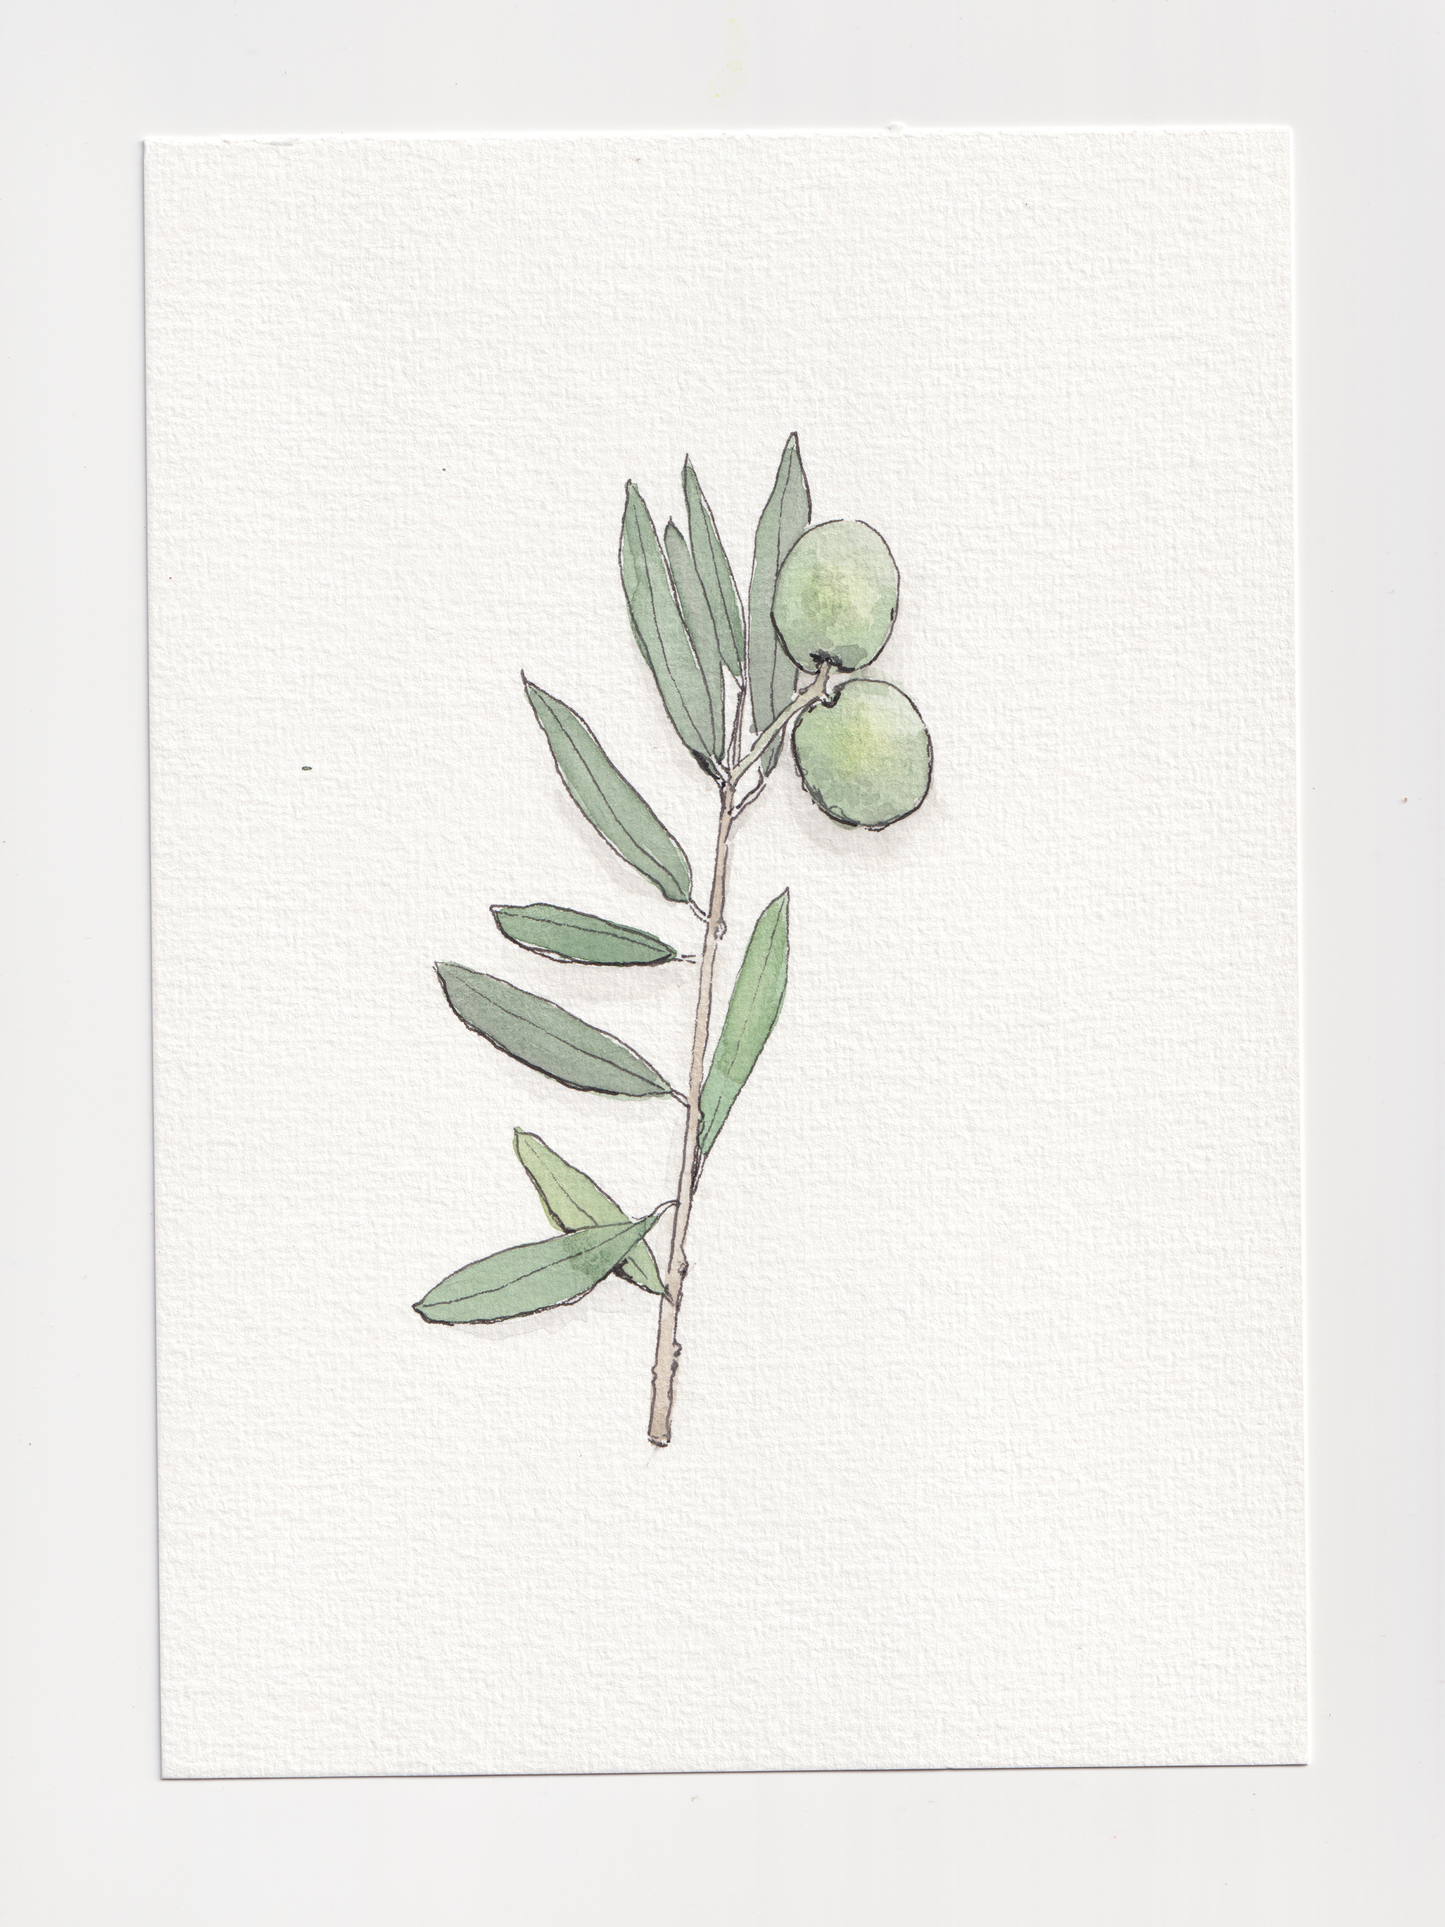 Daily Illustration - Day 11 - Olive branch